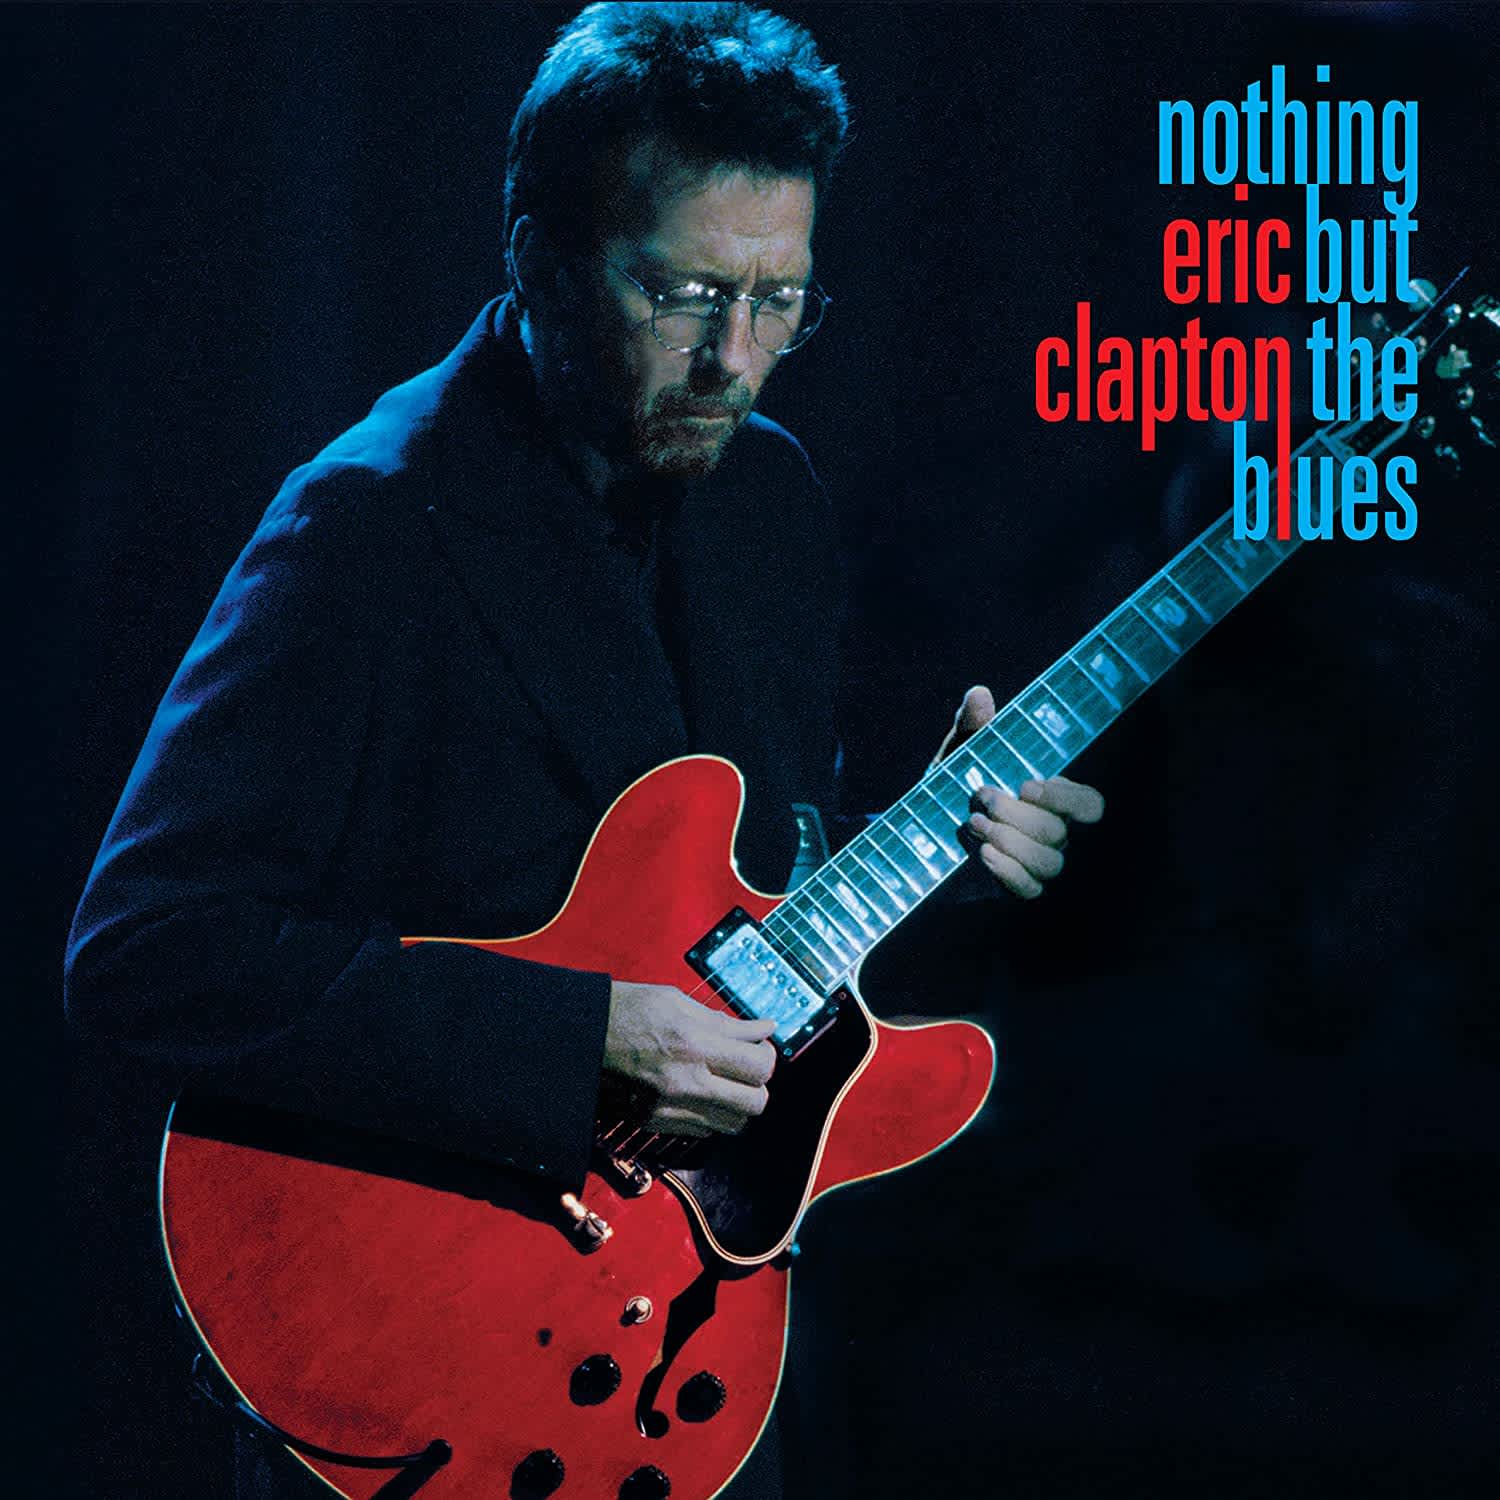 Eric Clapton - Nothing But The Blues (album cover)